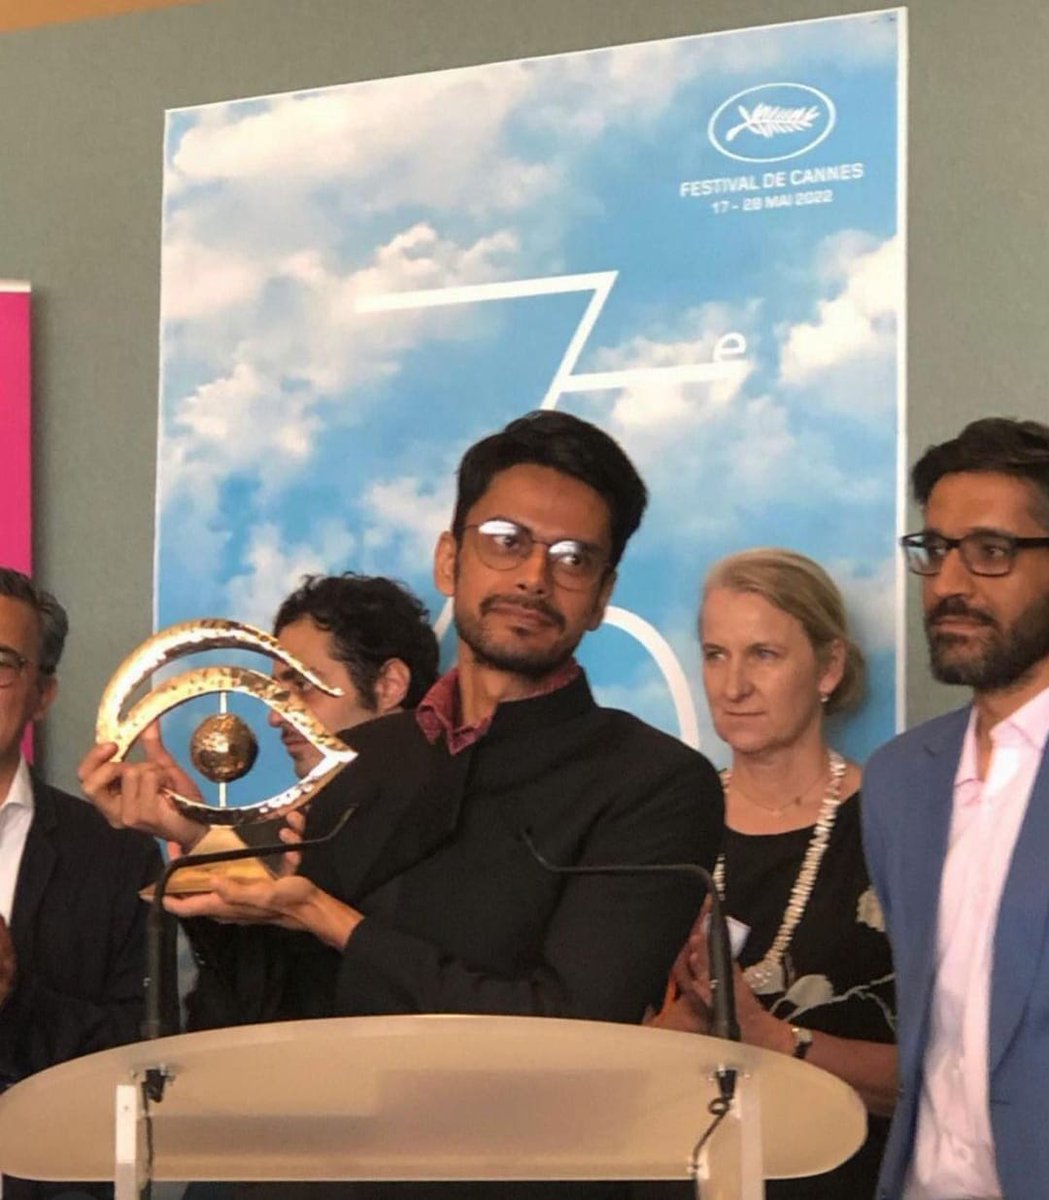 Congratulations to filmmaker #ShaunakSen for winning the top documentary award,  L’OEil D’ Or or ‘Golden Eye’ for his documentary, #AllThatBreathes at the #CannesFilmFestival. It’s a great achievement! 
#IndiaAtCannes #Cannes2022